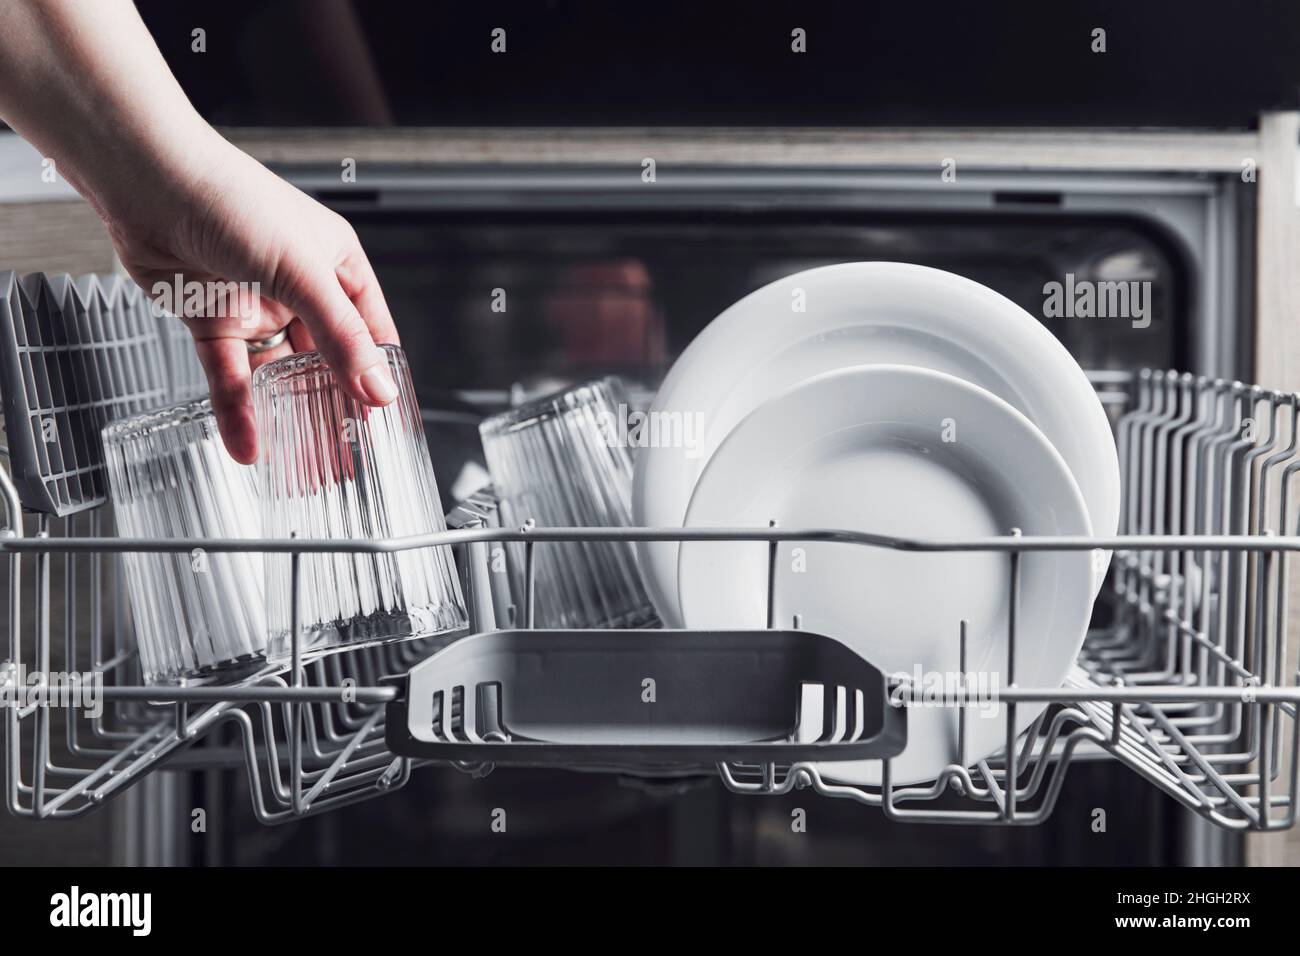 Female hand loading dished, empty out or unloading dishwasher with utensils. Kitchen appliances, lifestyle view. Woman puts a plate in the dishwasher or takes from it. Housewife does her housework  Stock Photo